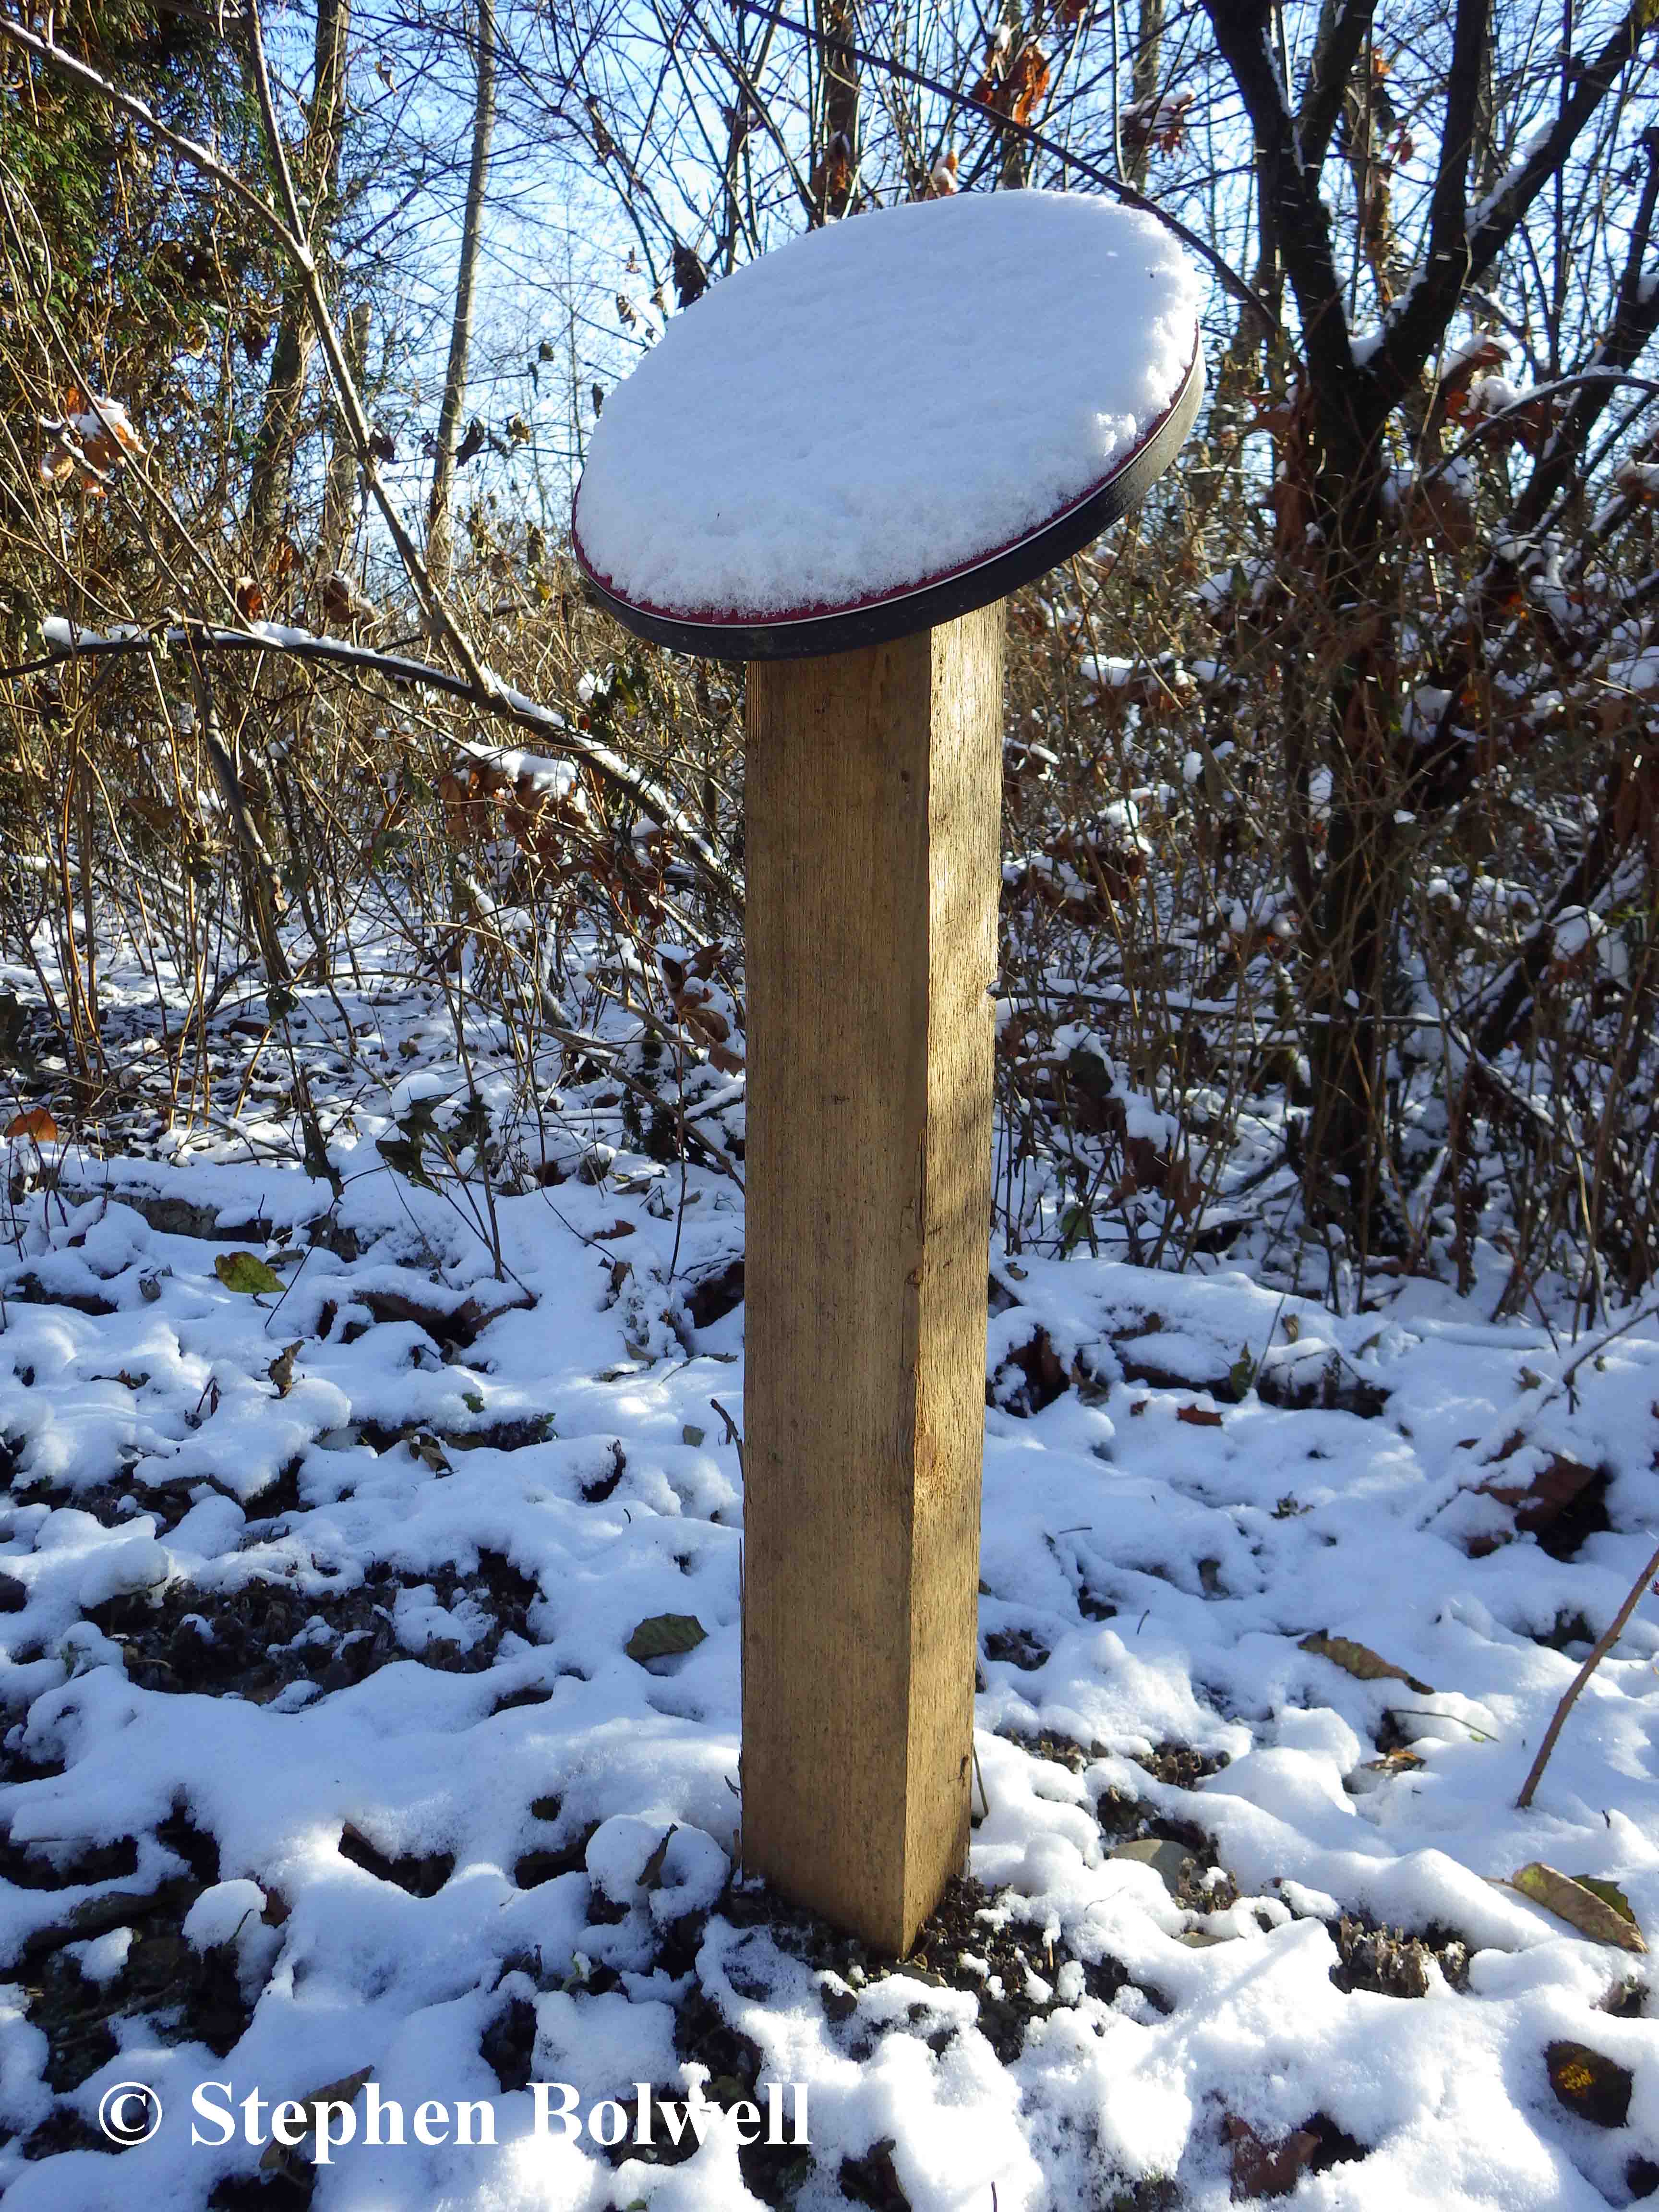 These signs do have their uses in cold weather - I know exactly how cold it is at the point when the snow begins to slide off the top board - to reveal rhyming details for a woodland dweller, presumably with the intention of engaging children.